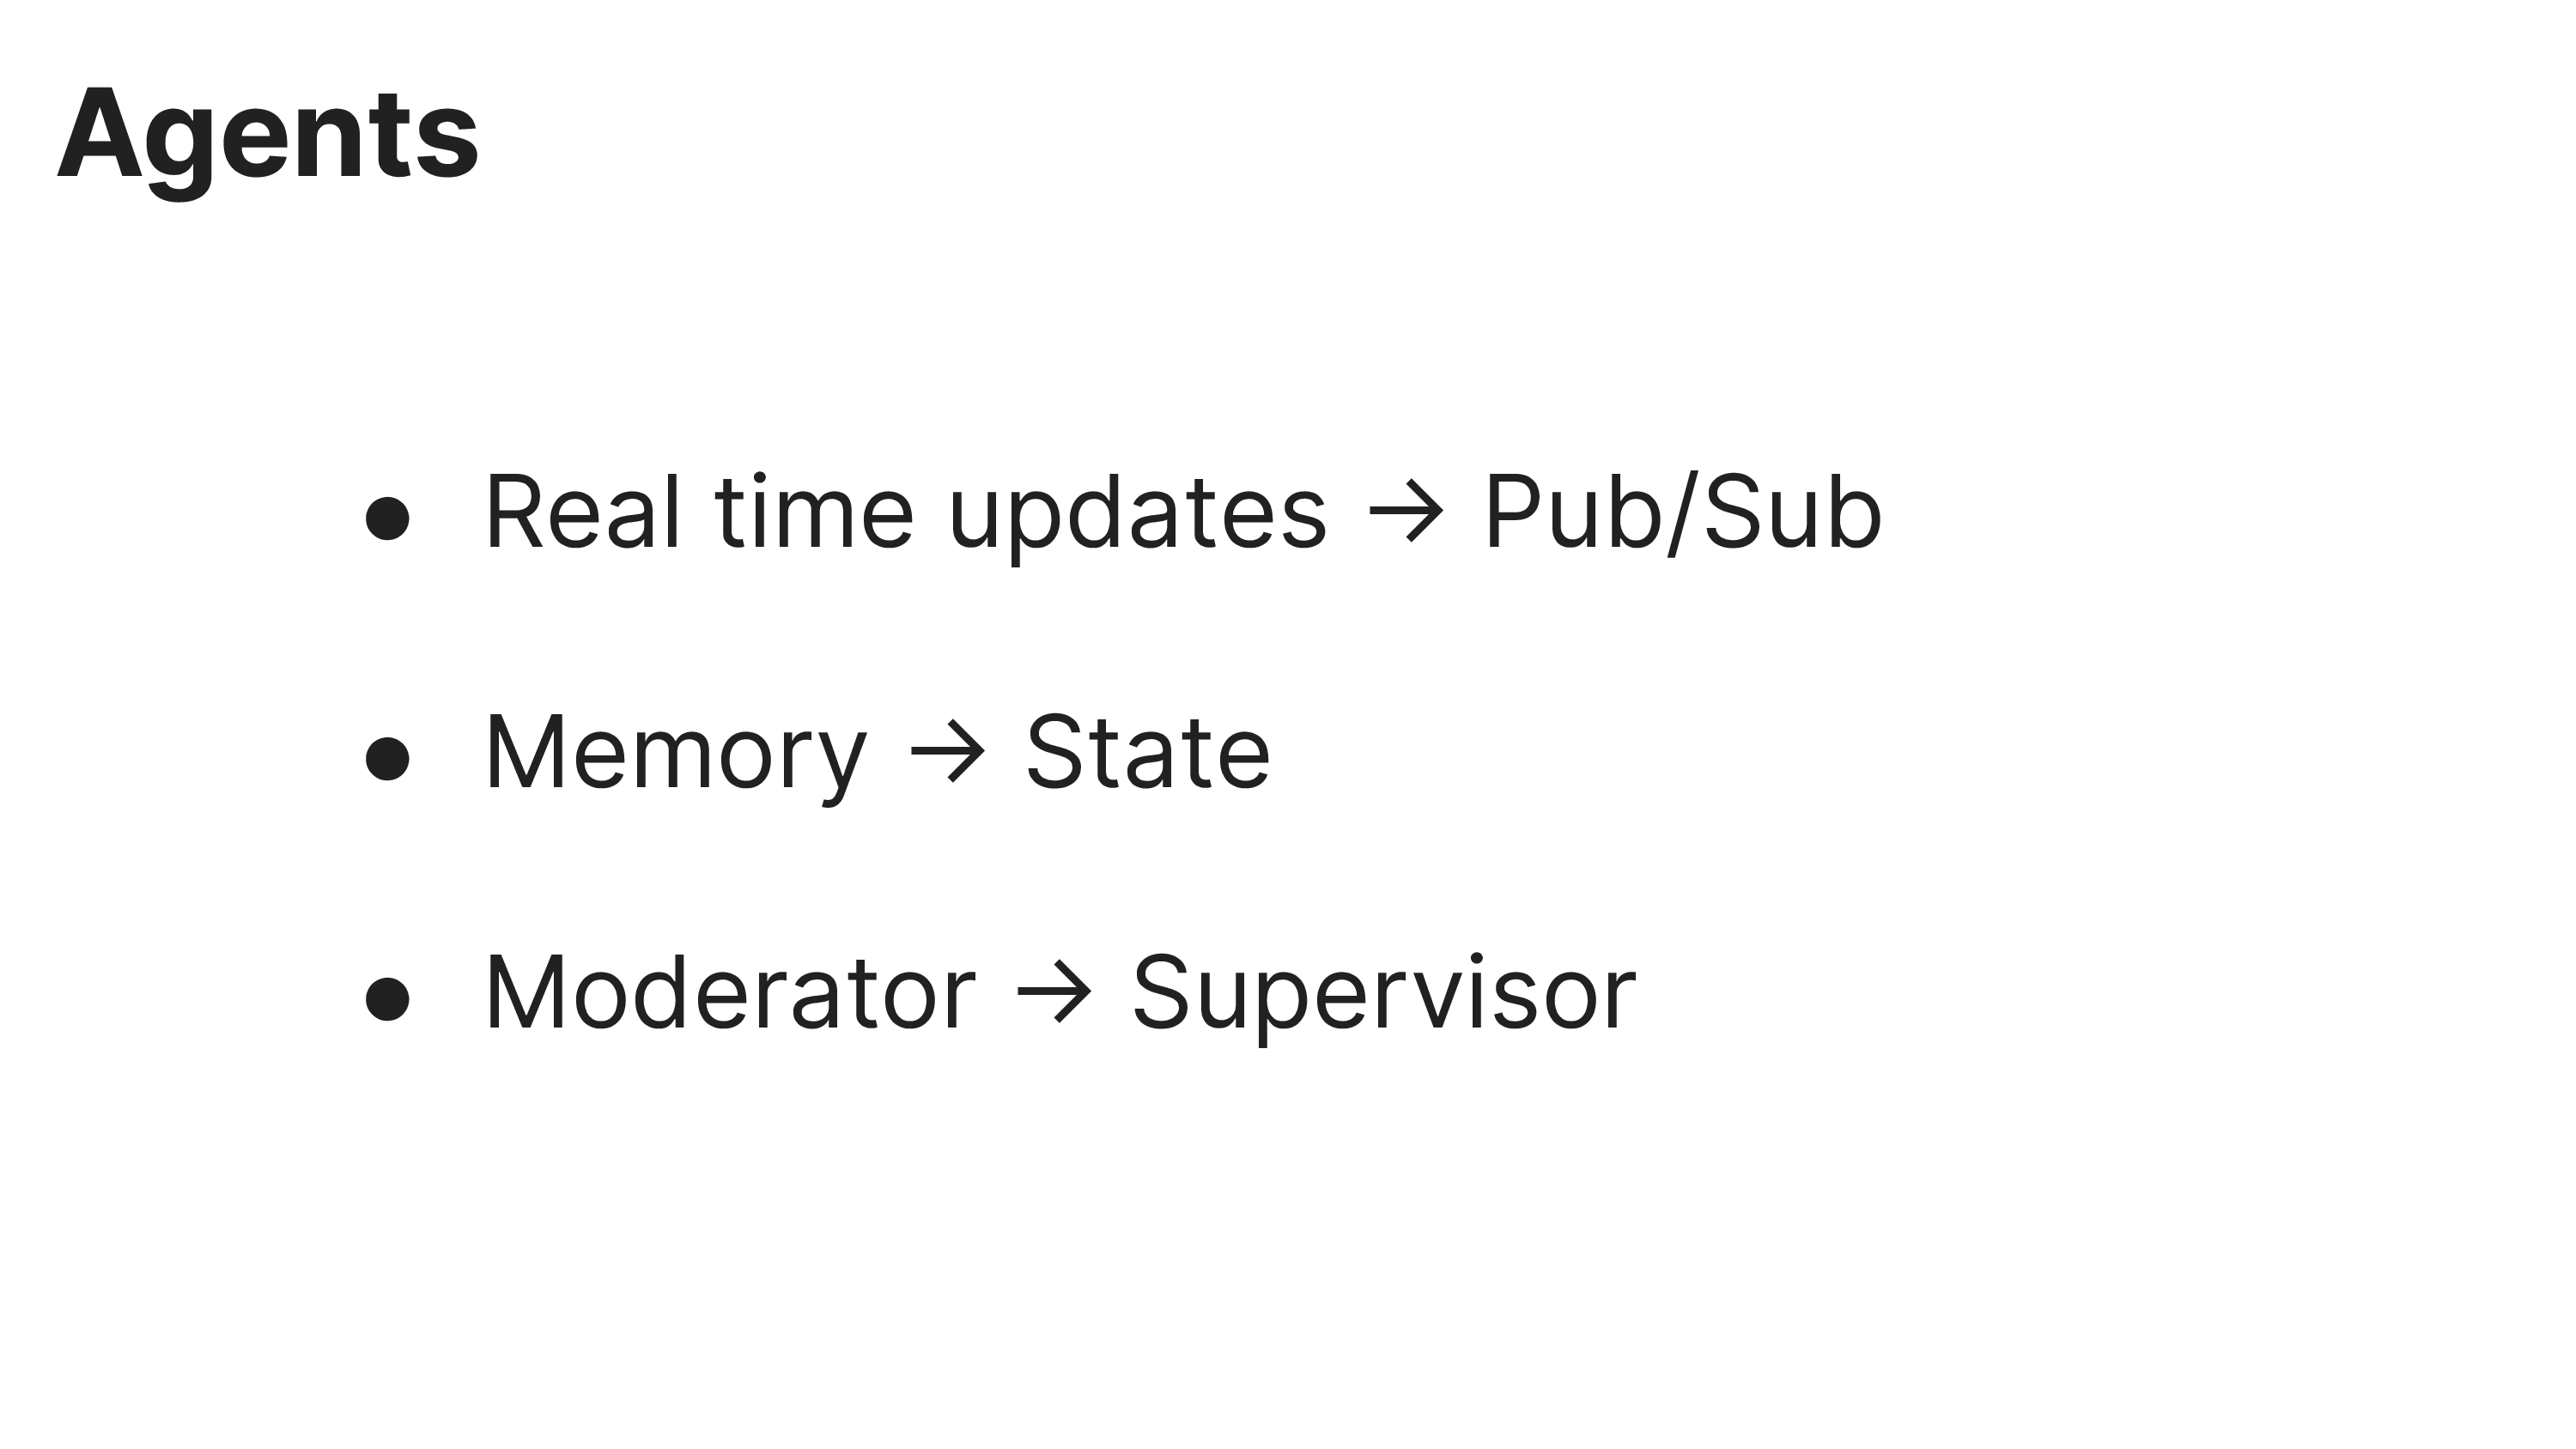 Agents
@ Real time updates - Pub/Sub
@® Memory - State
@® Moderator - Supervisor
